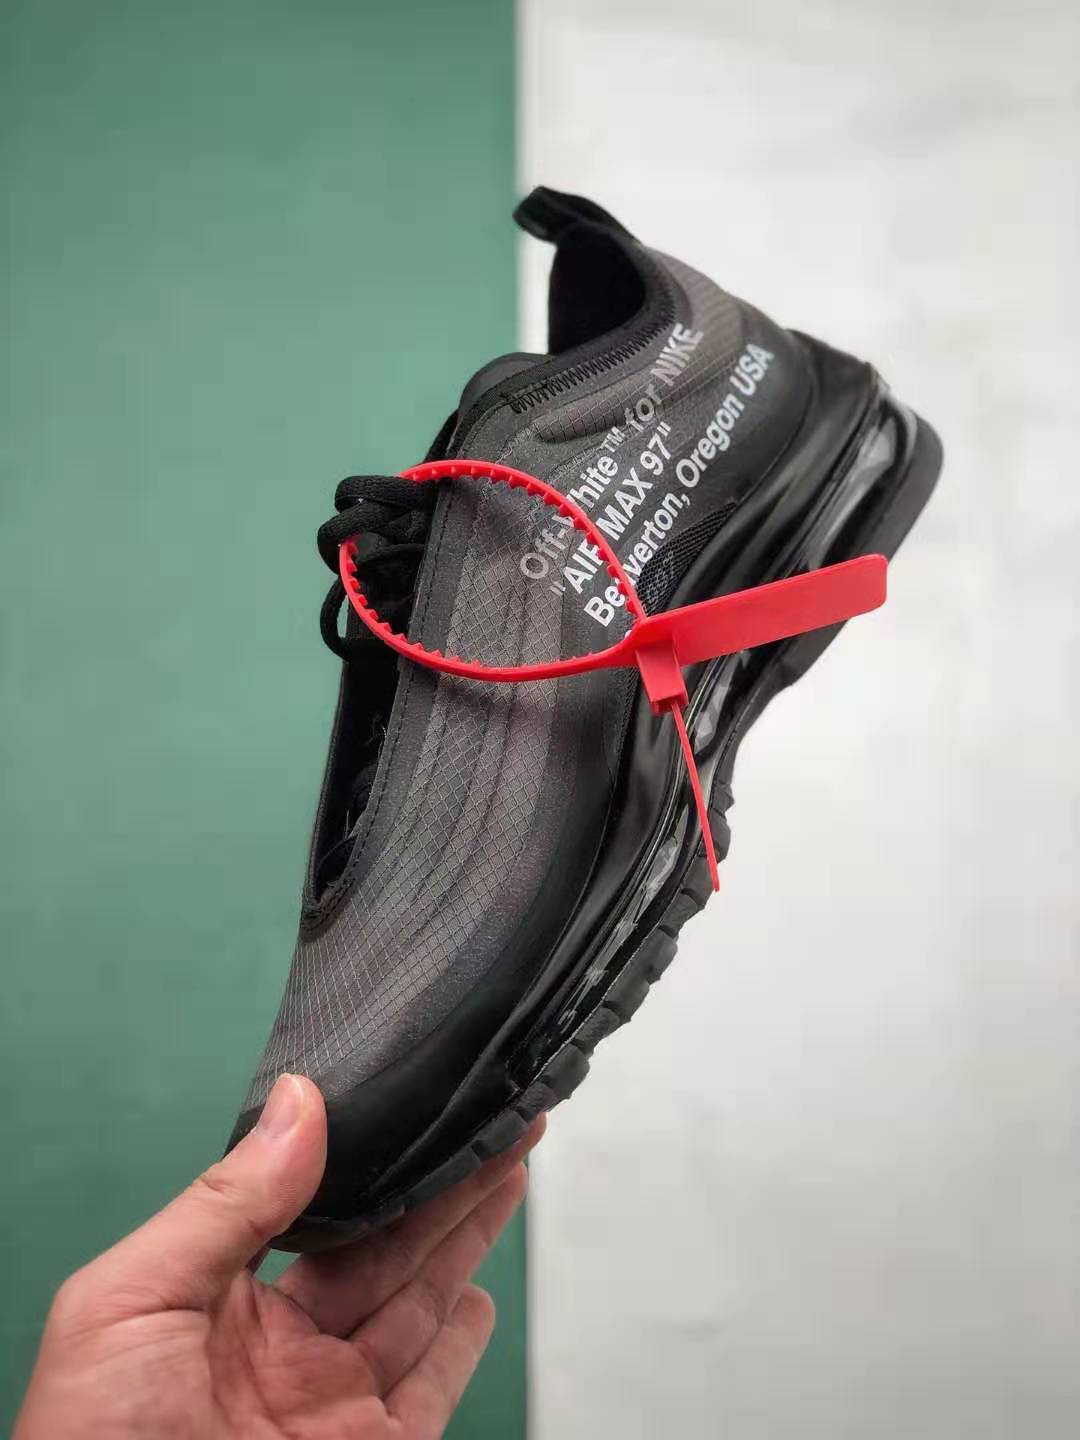 Nike Off-White x Air Max 97 'Black' AJ4585-001 - Limited Edition Sneaker Available Now